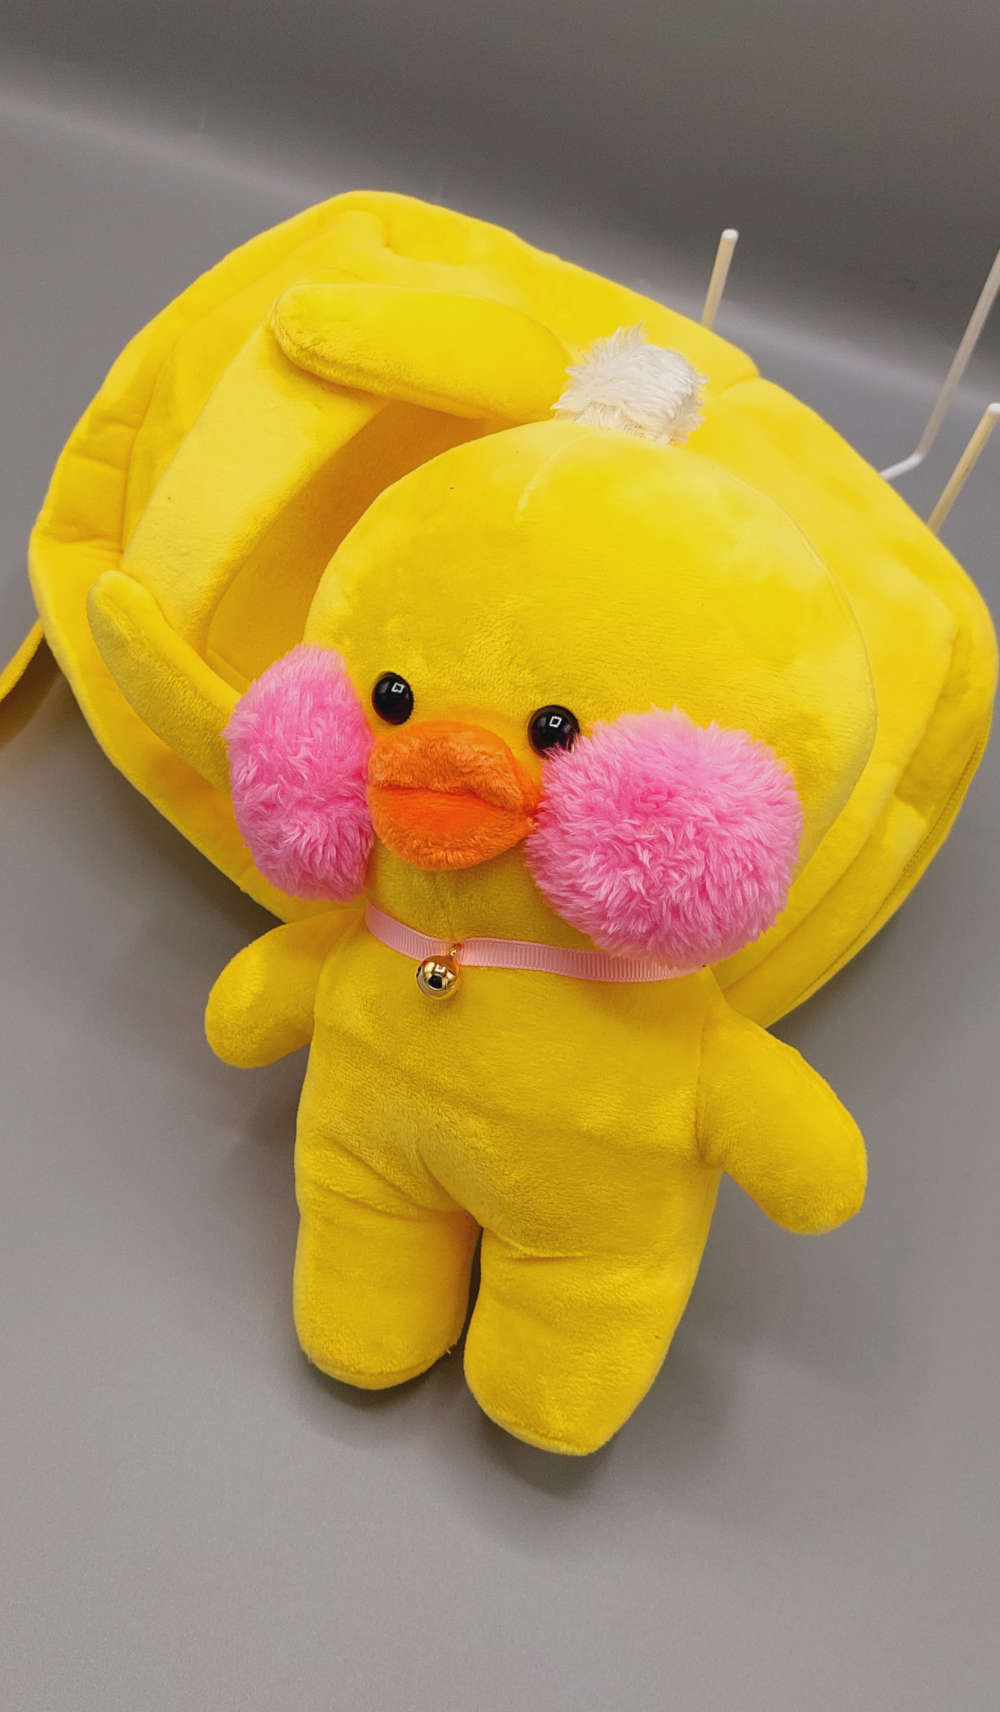 Duck Plush Stuffed Toy Backpack With Detachable Toy For Kids | Cute Mini Duck Cartoon Soft Toy School Bag